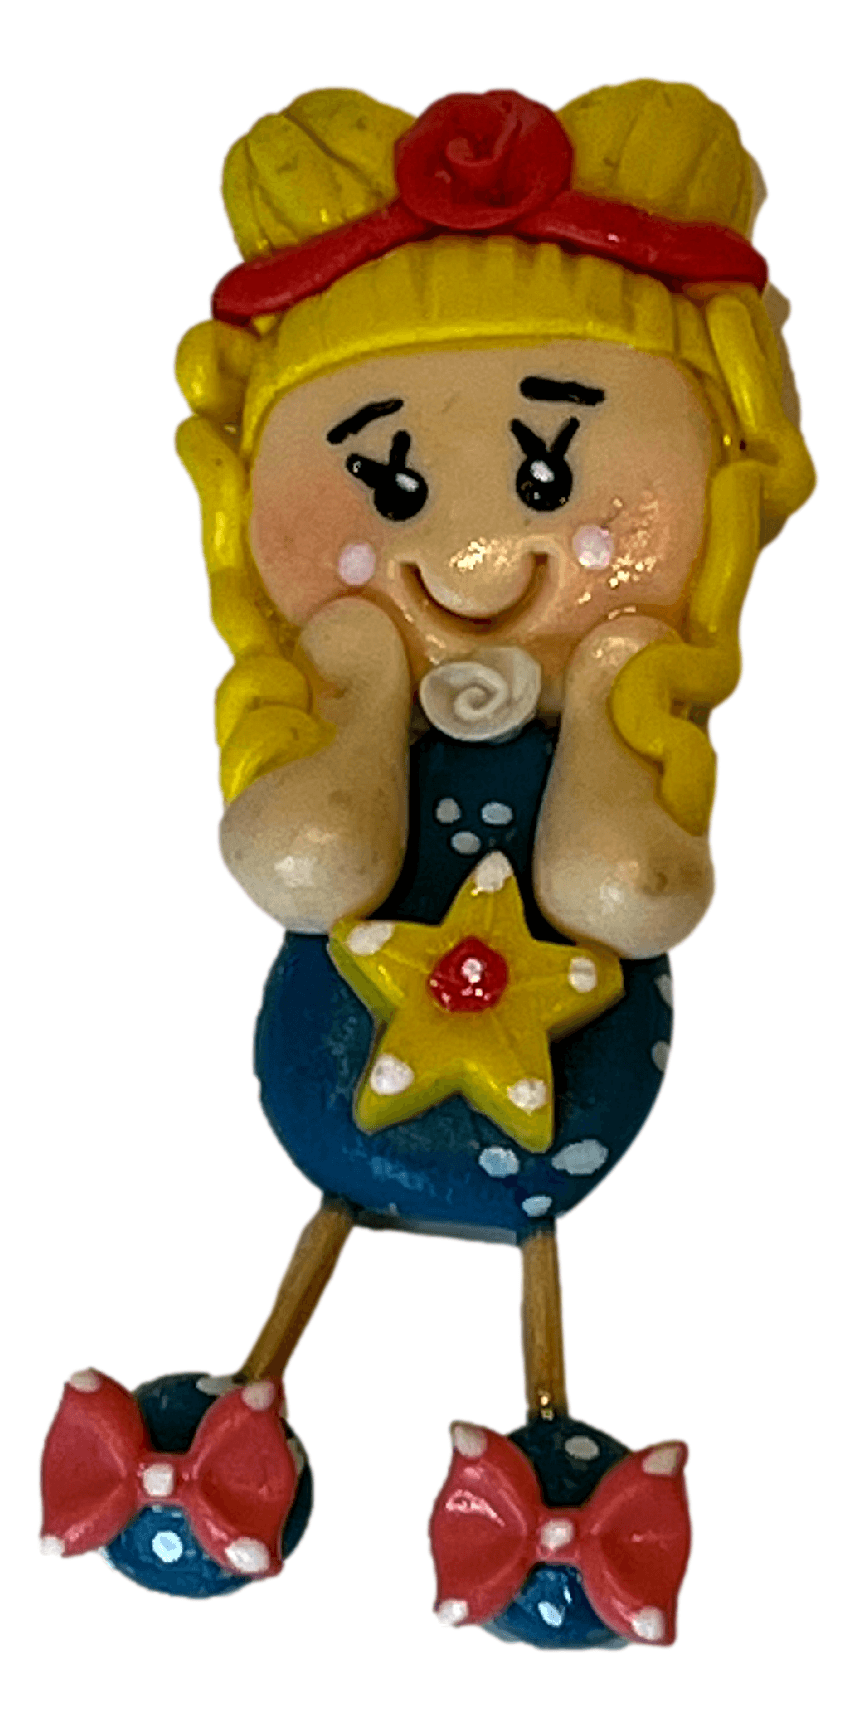 Magnet Baked Clay Girls L: 3 inches X W: 1.5 inches - Ysleta Mission Gift Shop- VOTED El Paso's Best Gift Shop